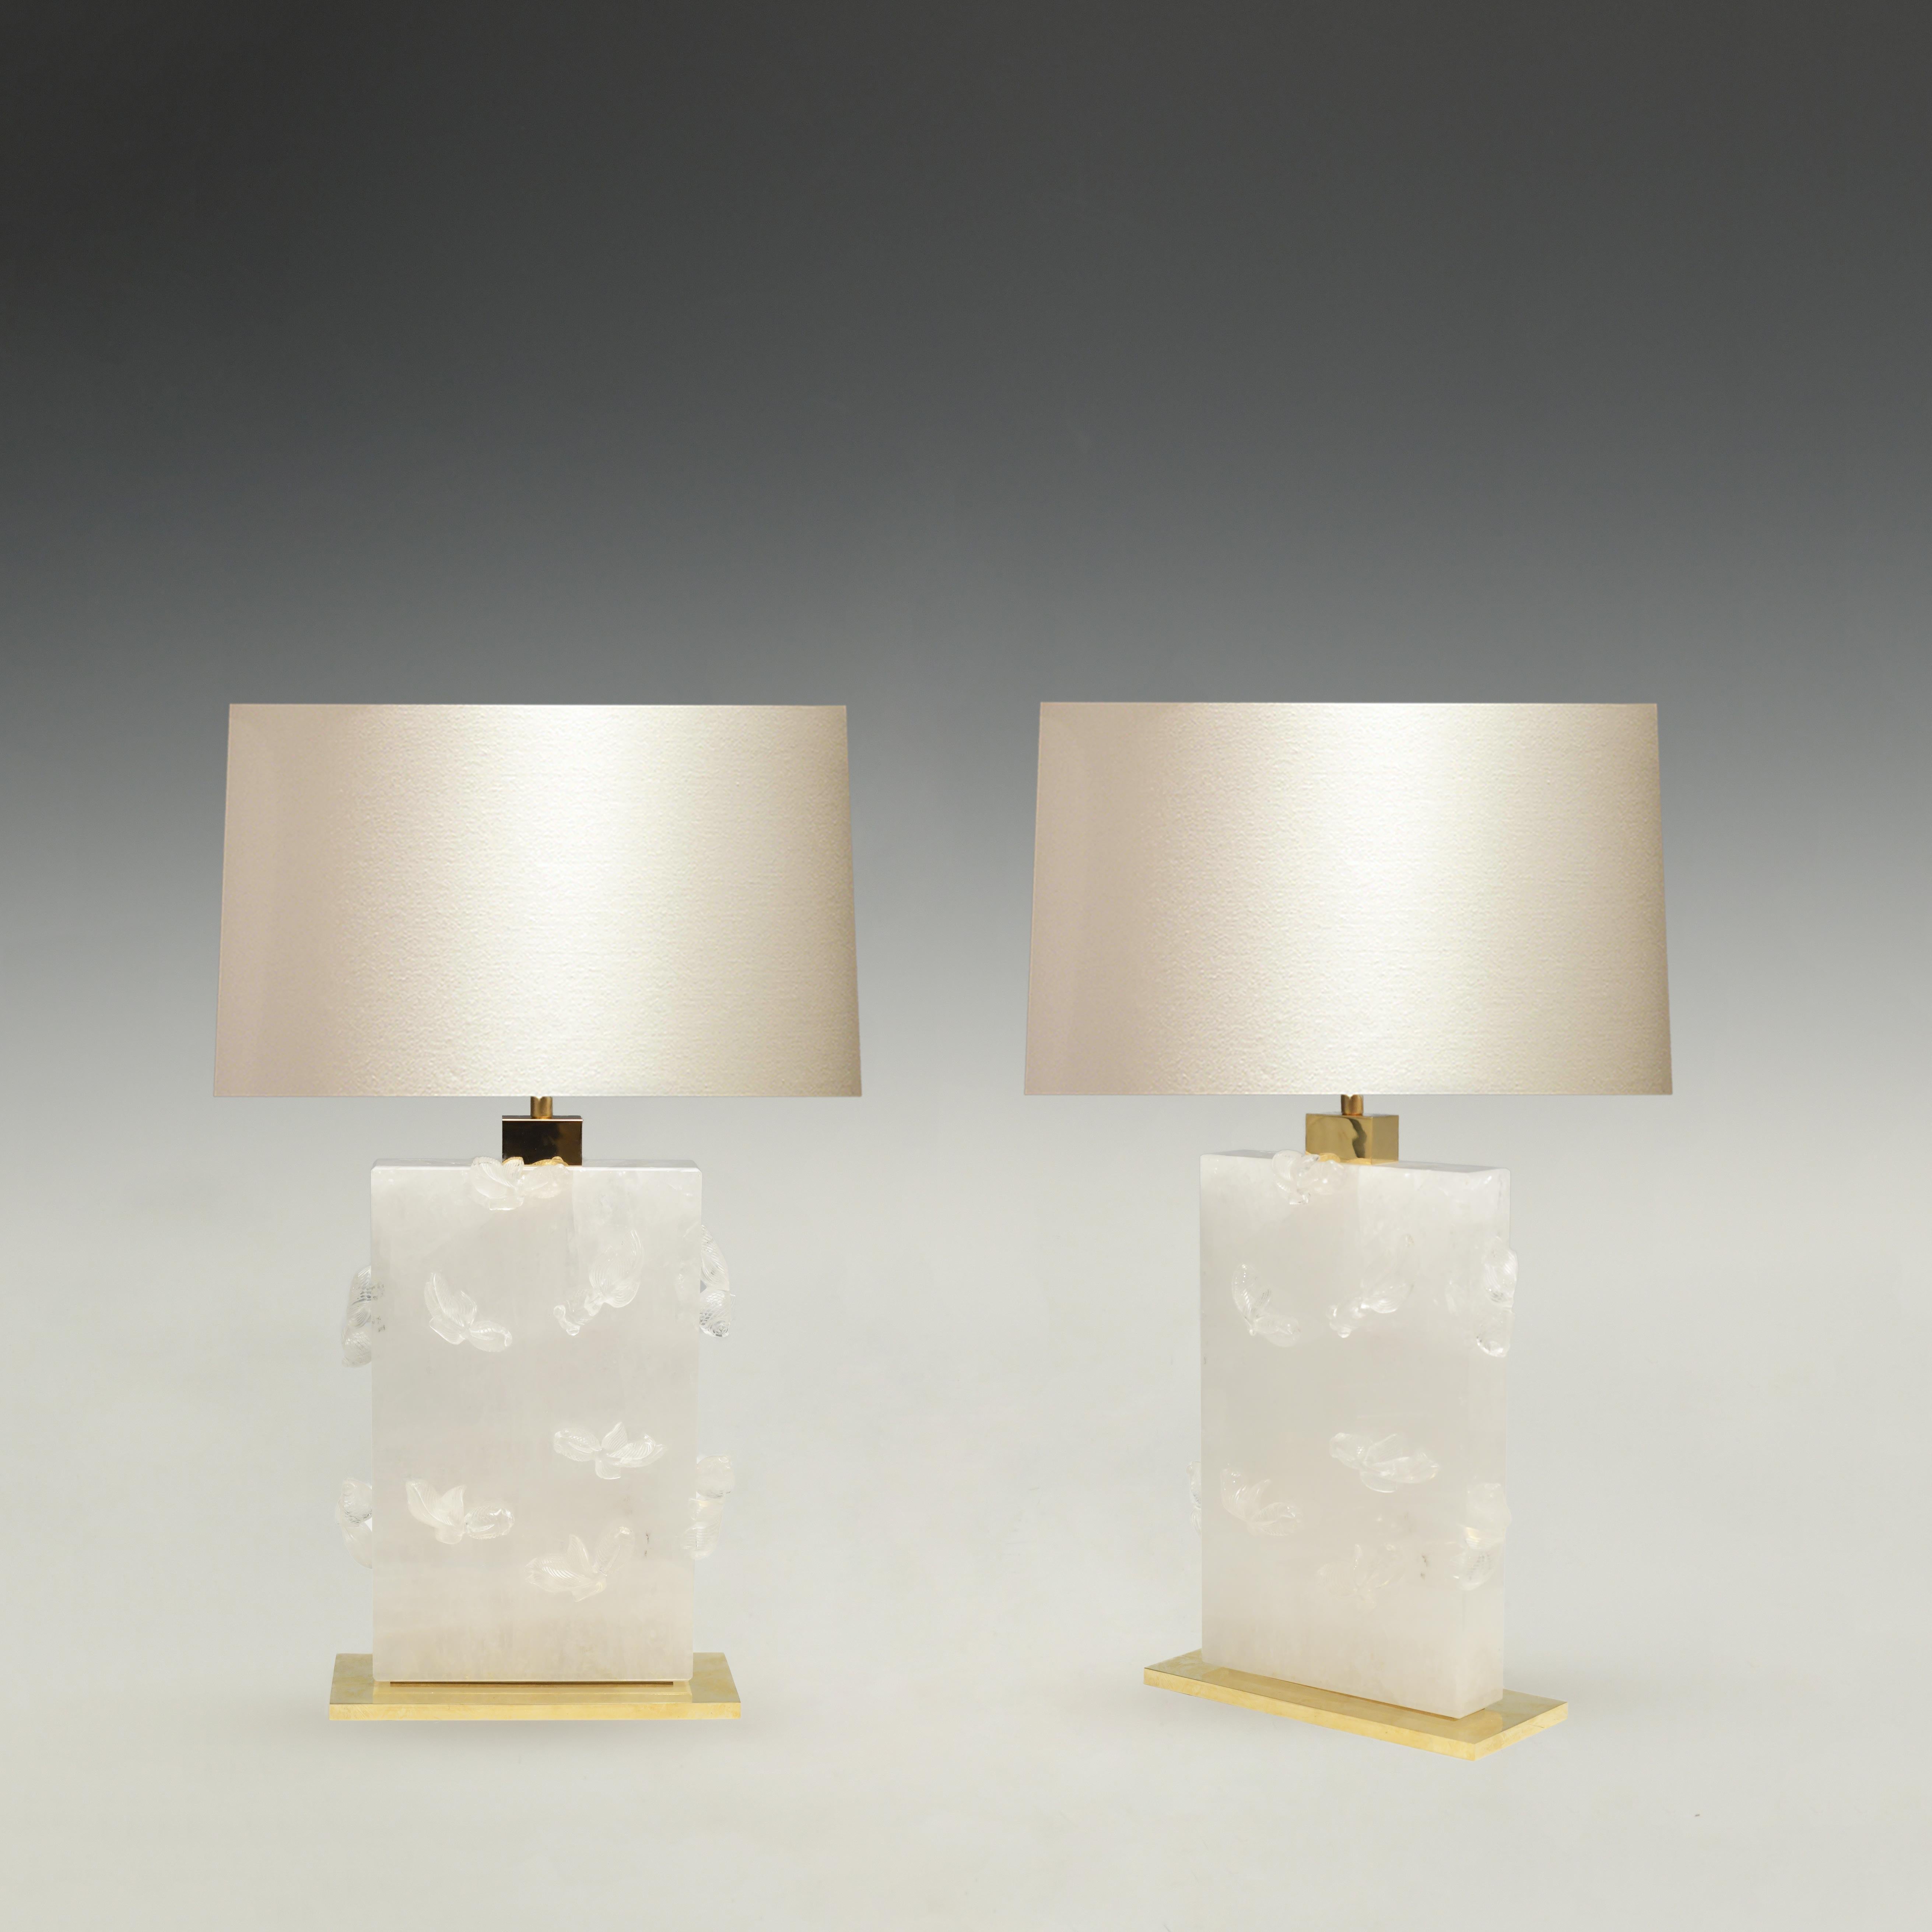 Pair of fine carved swimming goldfish rock crystal lamps with polish brass decoration. Created by Phoenix. To the top of rock crystal is 13.5 in. Each lamp installs two sockets. Lampshades do not include.